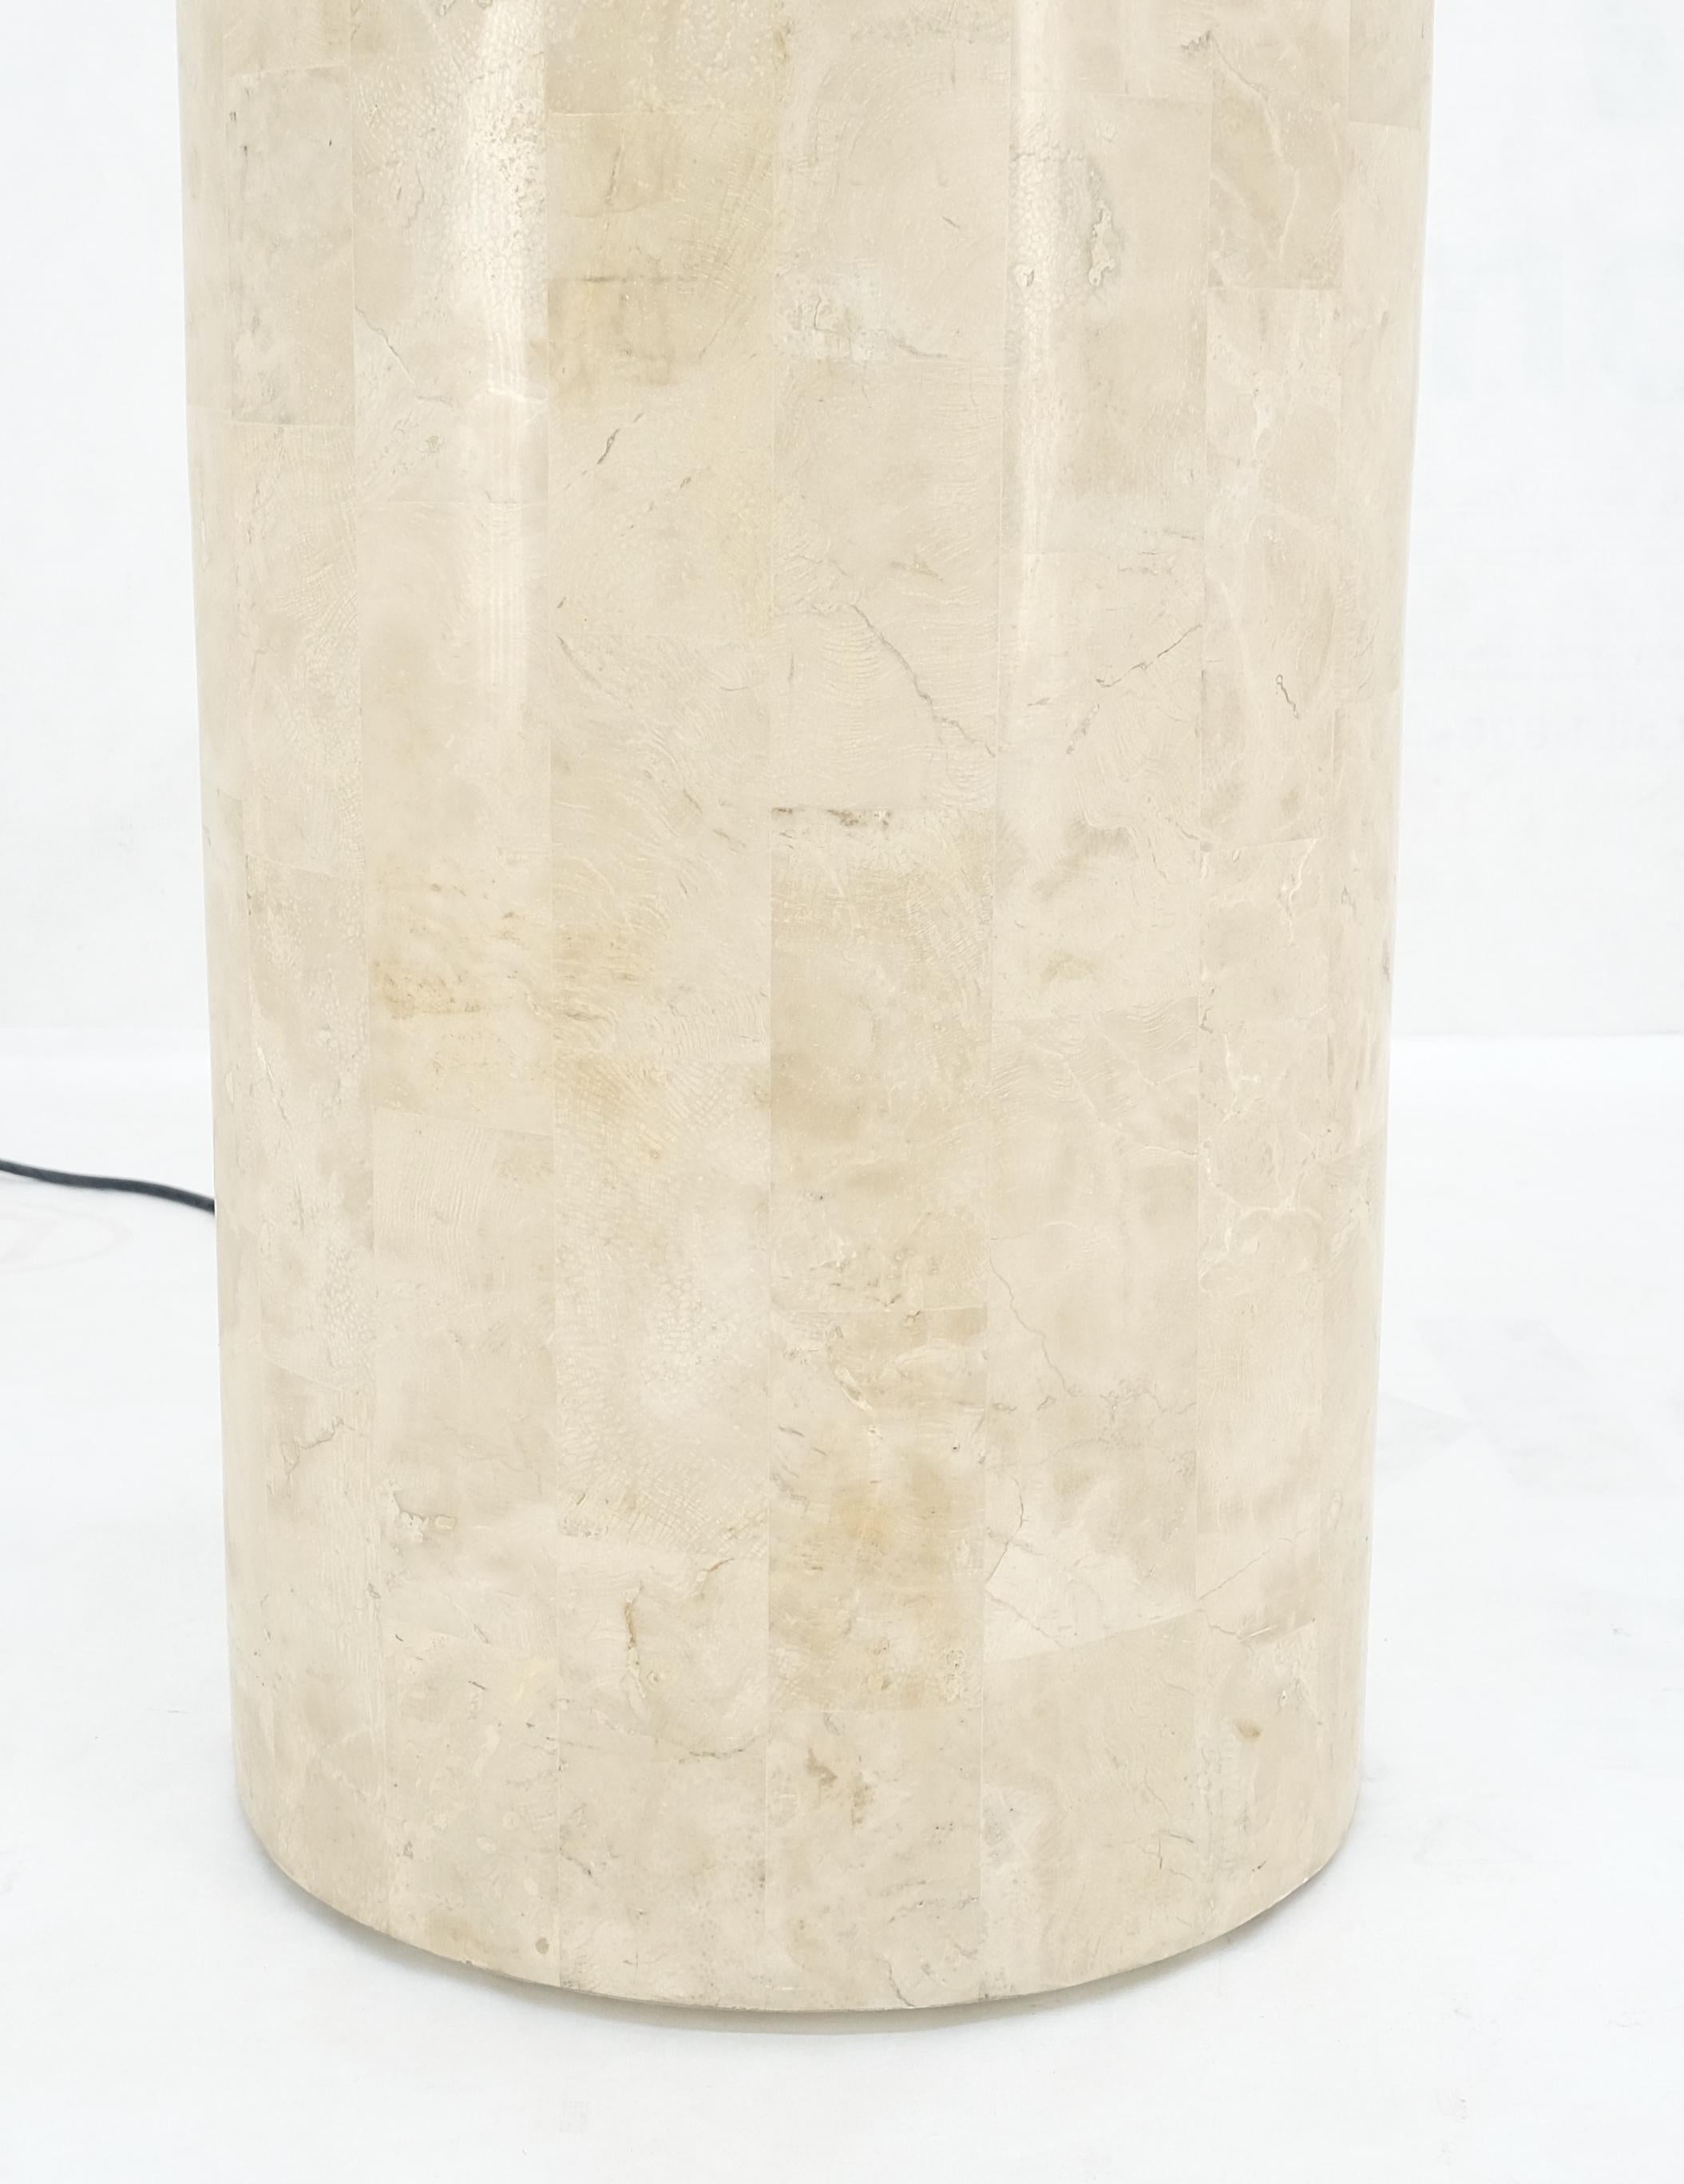 Turning Top Lighted Electrified Tessellated Marble Round Pedestal Stand MINT! (Furnier) im Angebot